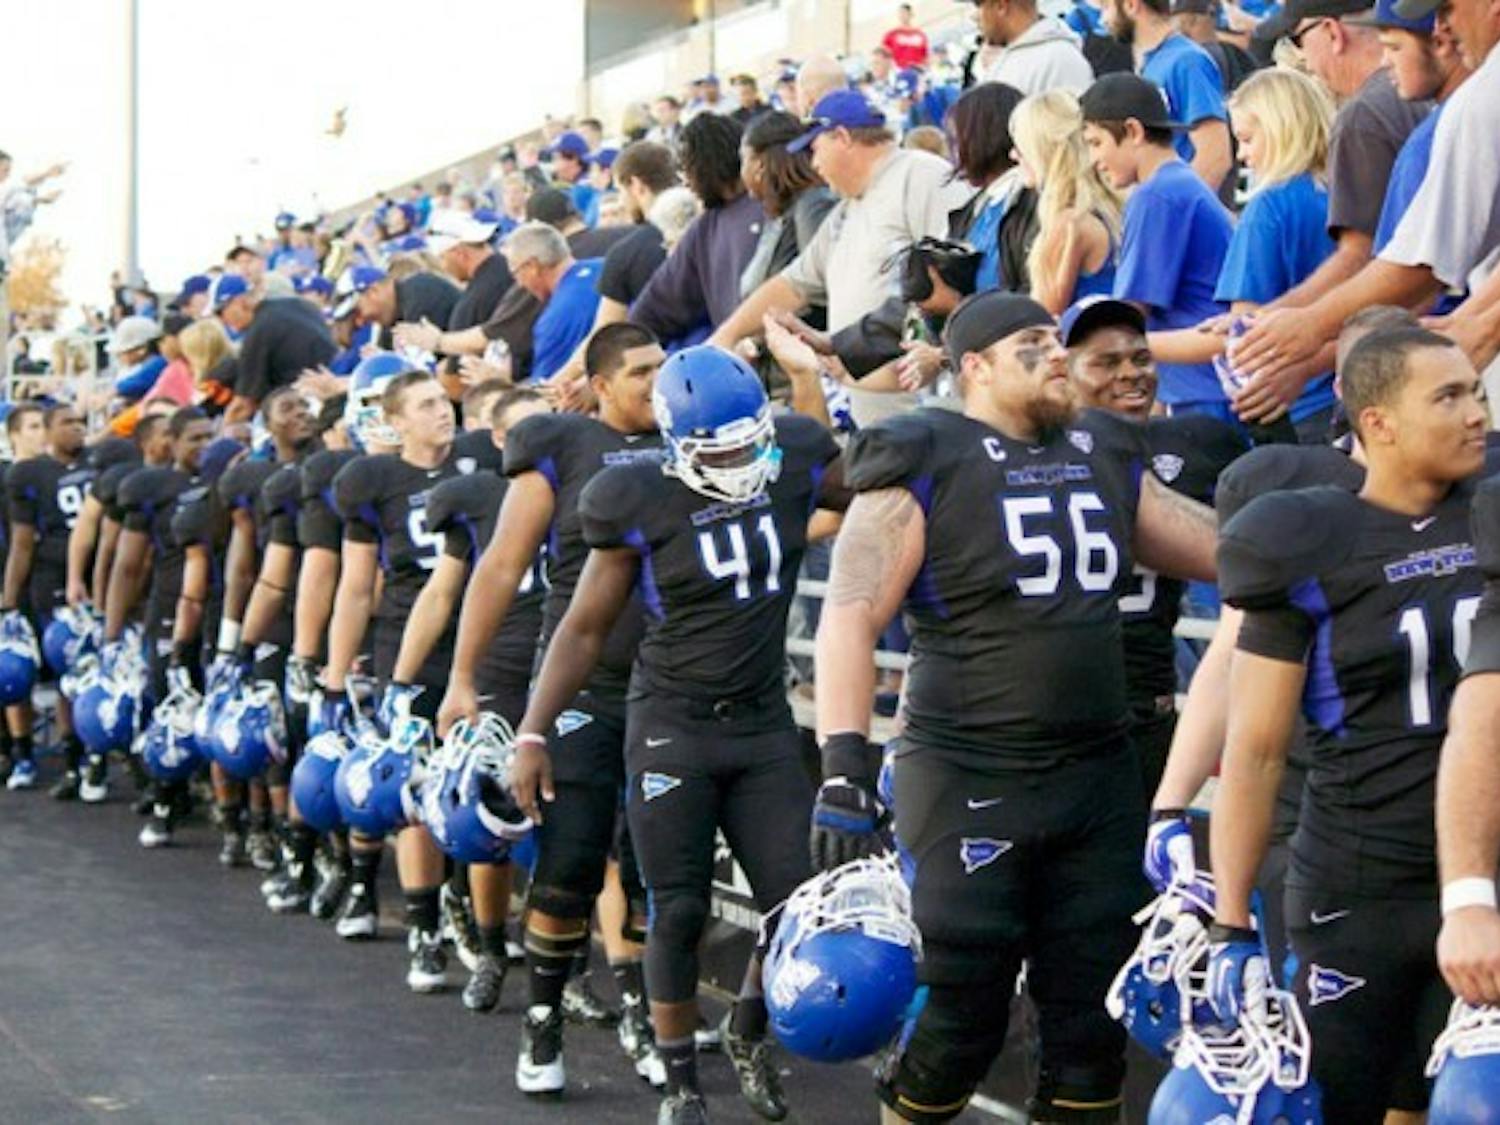 The football team celebrates with fans at UB Stadium after defeating Connecticut on Sept. 28 2013. ESPN and the MAC announced a 13-year media rights extension on Aug. 19. Chad Cooper, The Spectrum